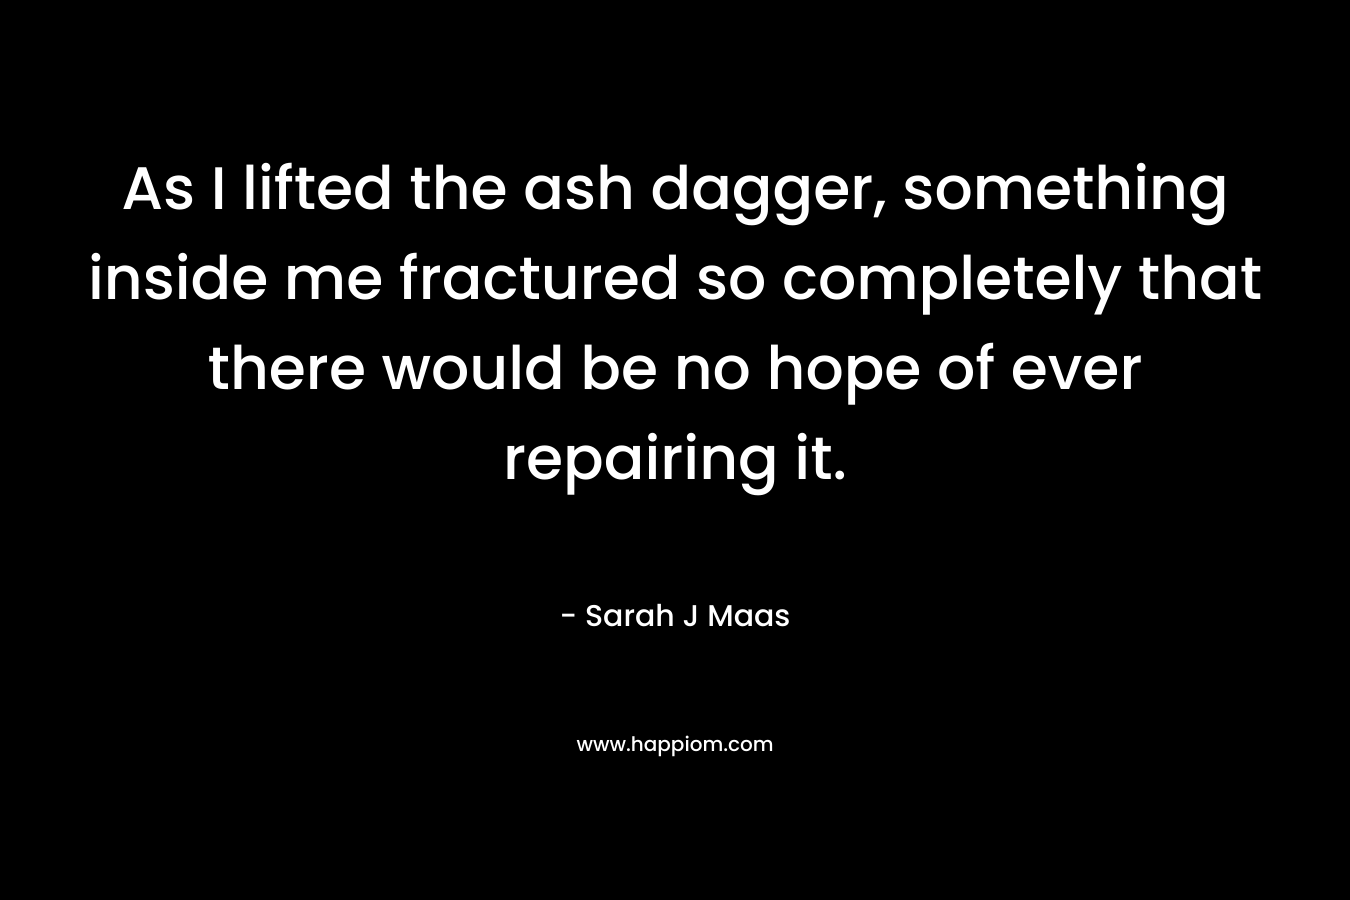 As I lifted the ash dagger, something inside me fractured so completely that there would be no hope of ever repairing it. – Sarah J Maas